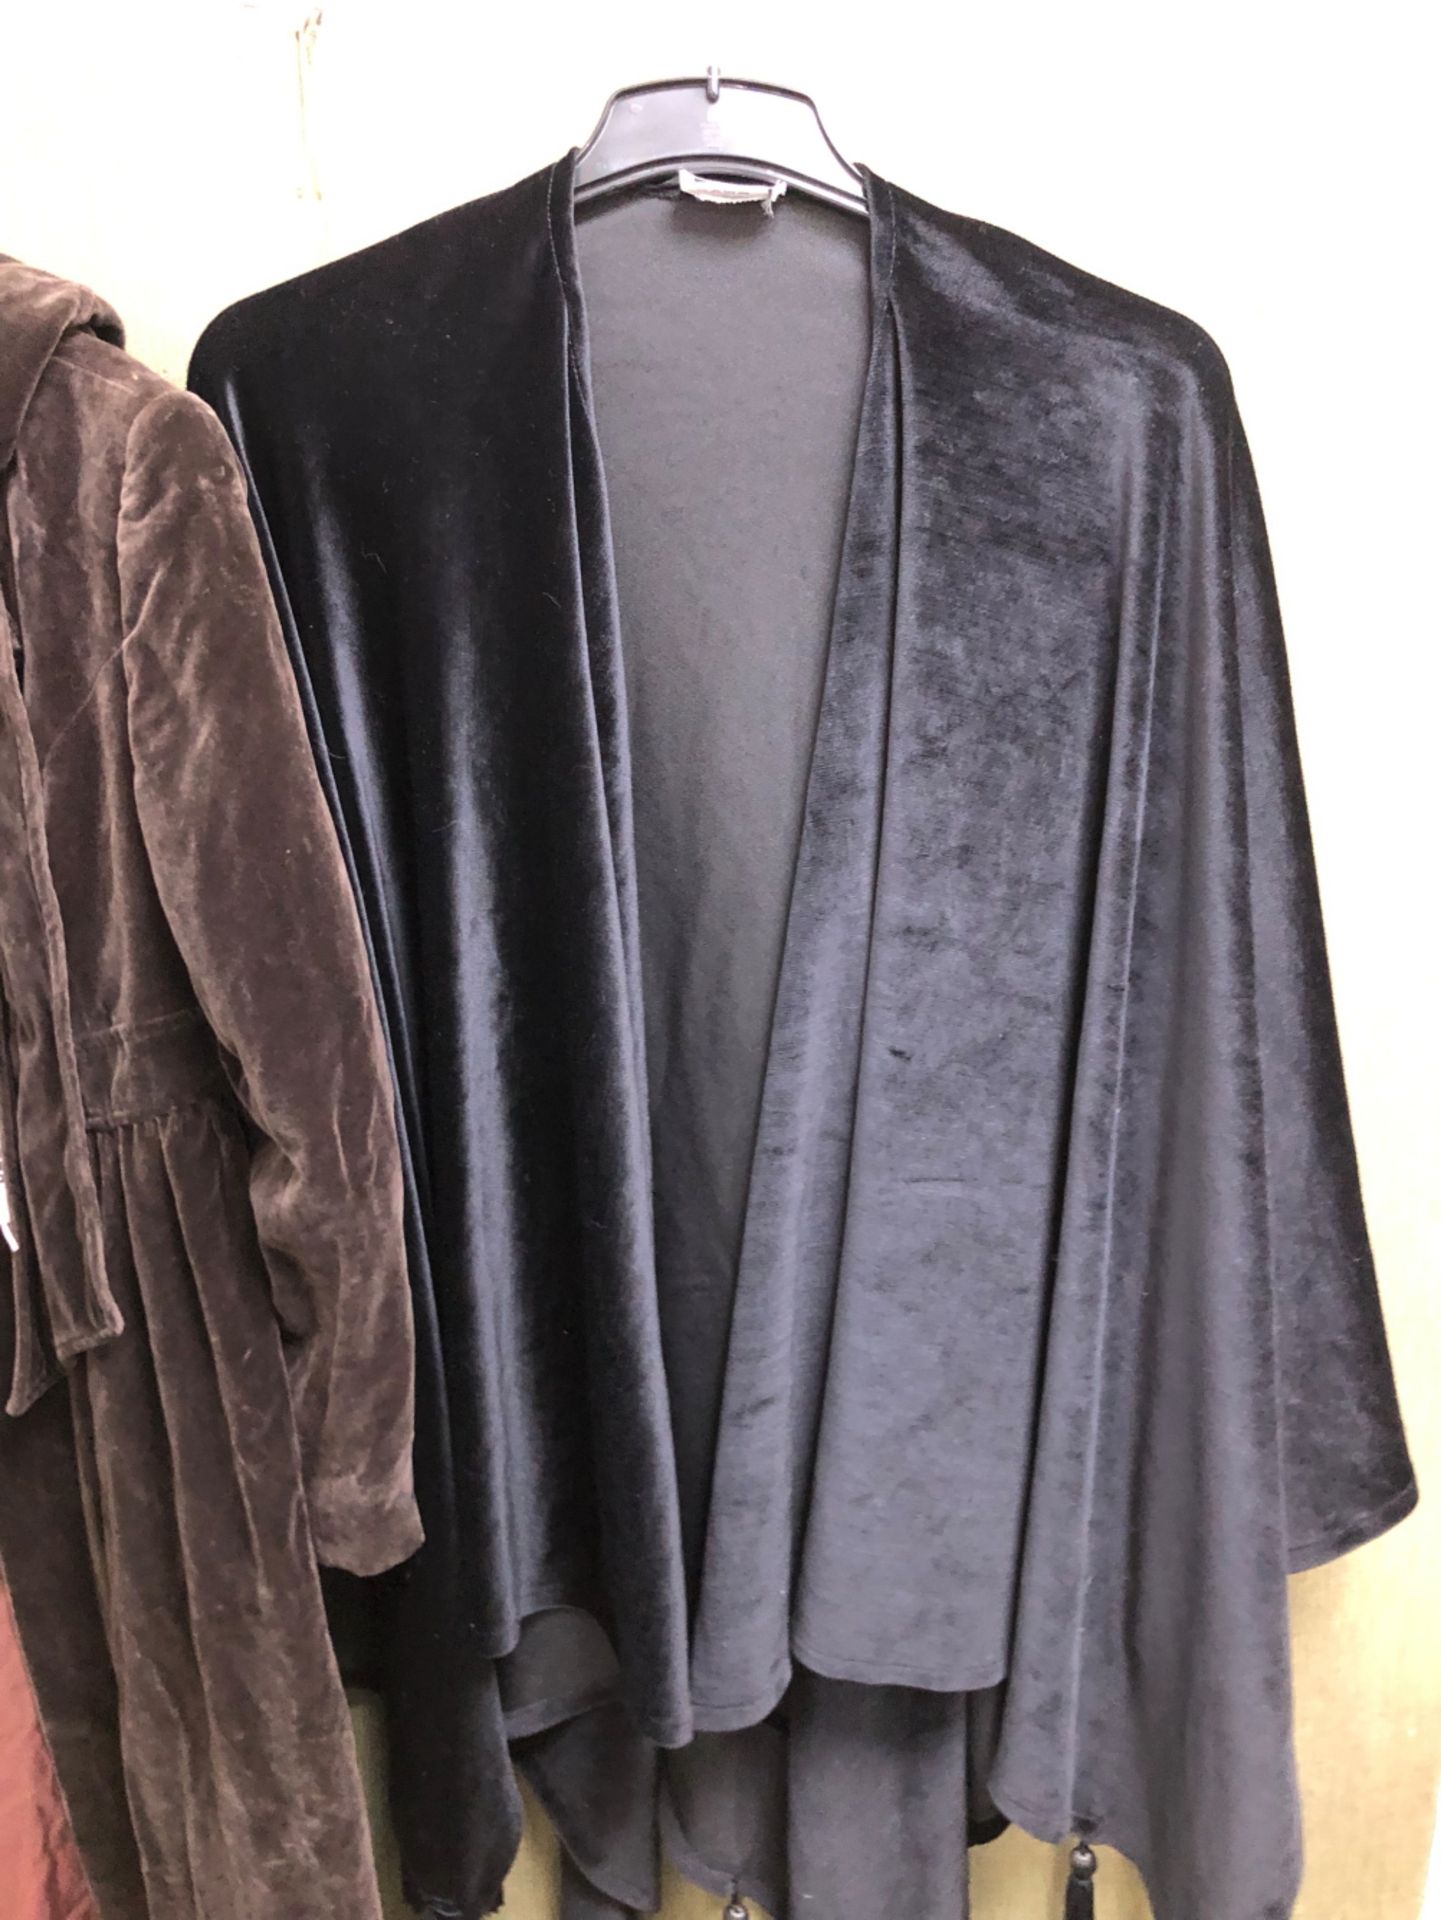 A FRANK USHER VELVET CAPE WITH TASSEL TRIM AND A MONO MADE IN ENGLAND BROWN VELVET HOODED LONG - Image 2 of 9